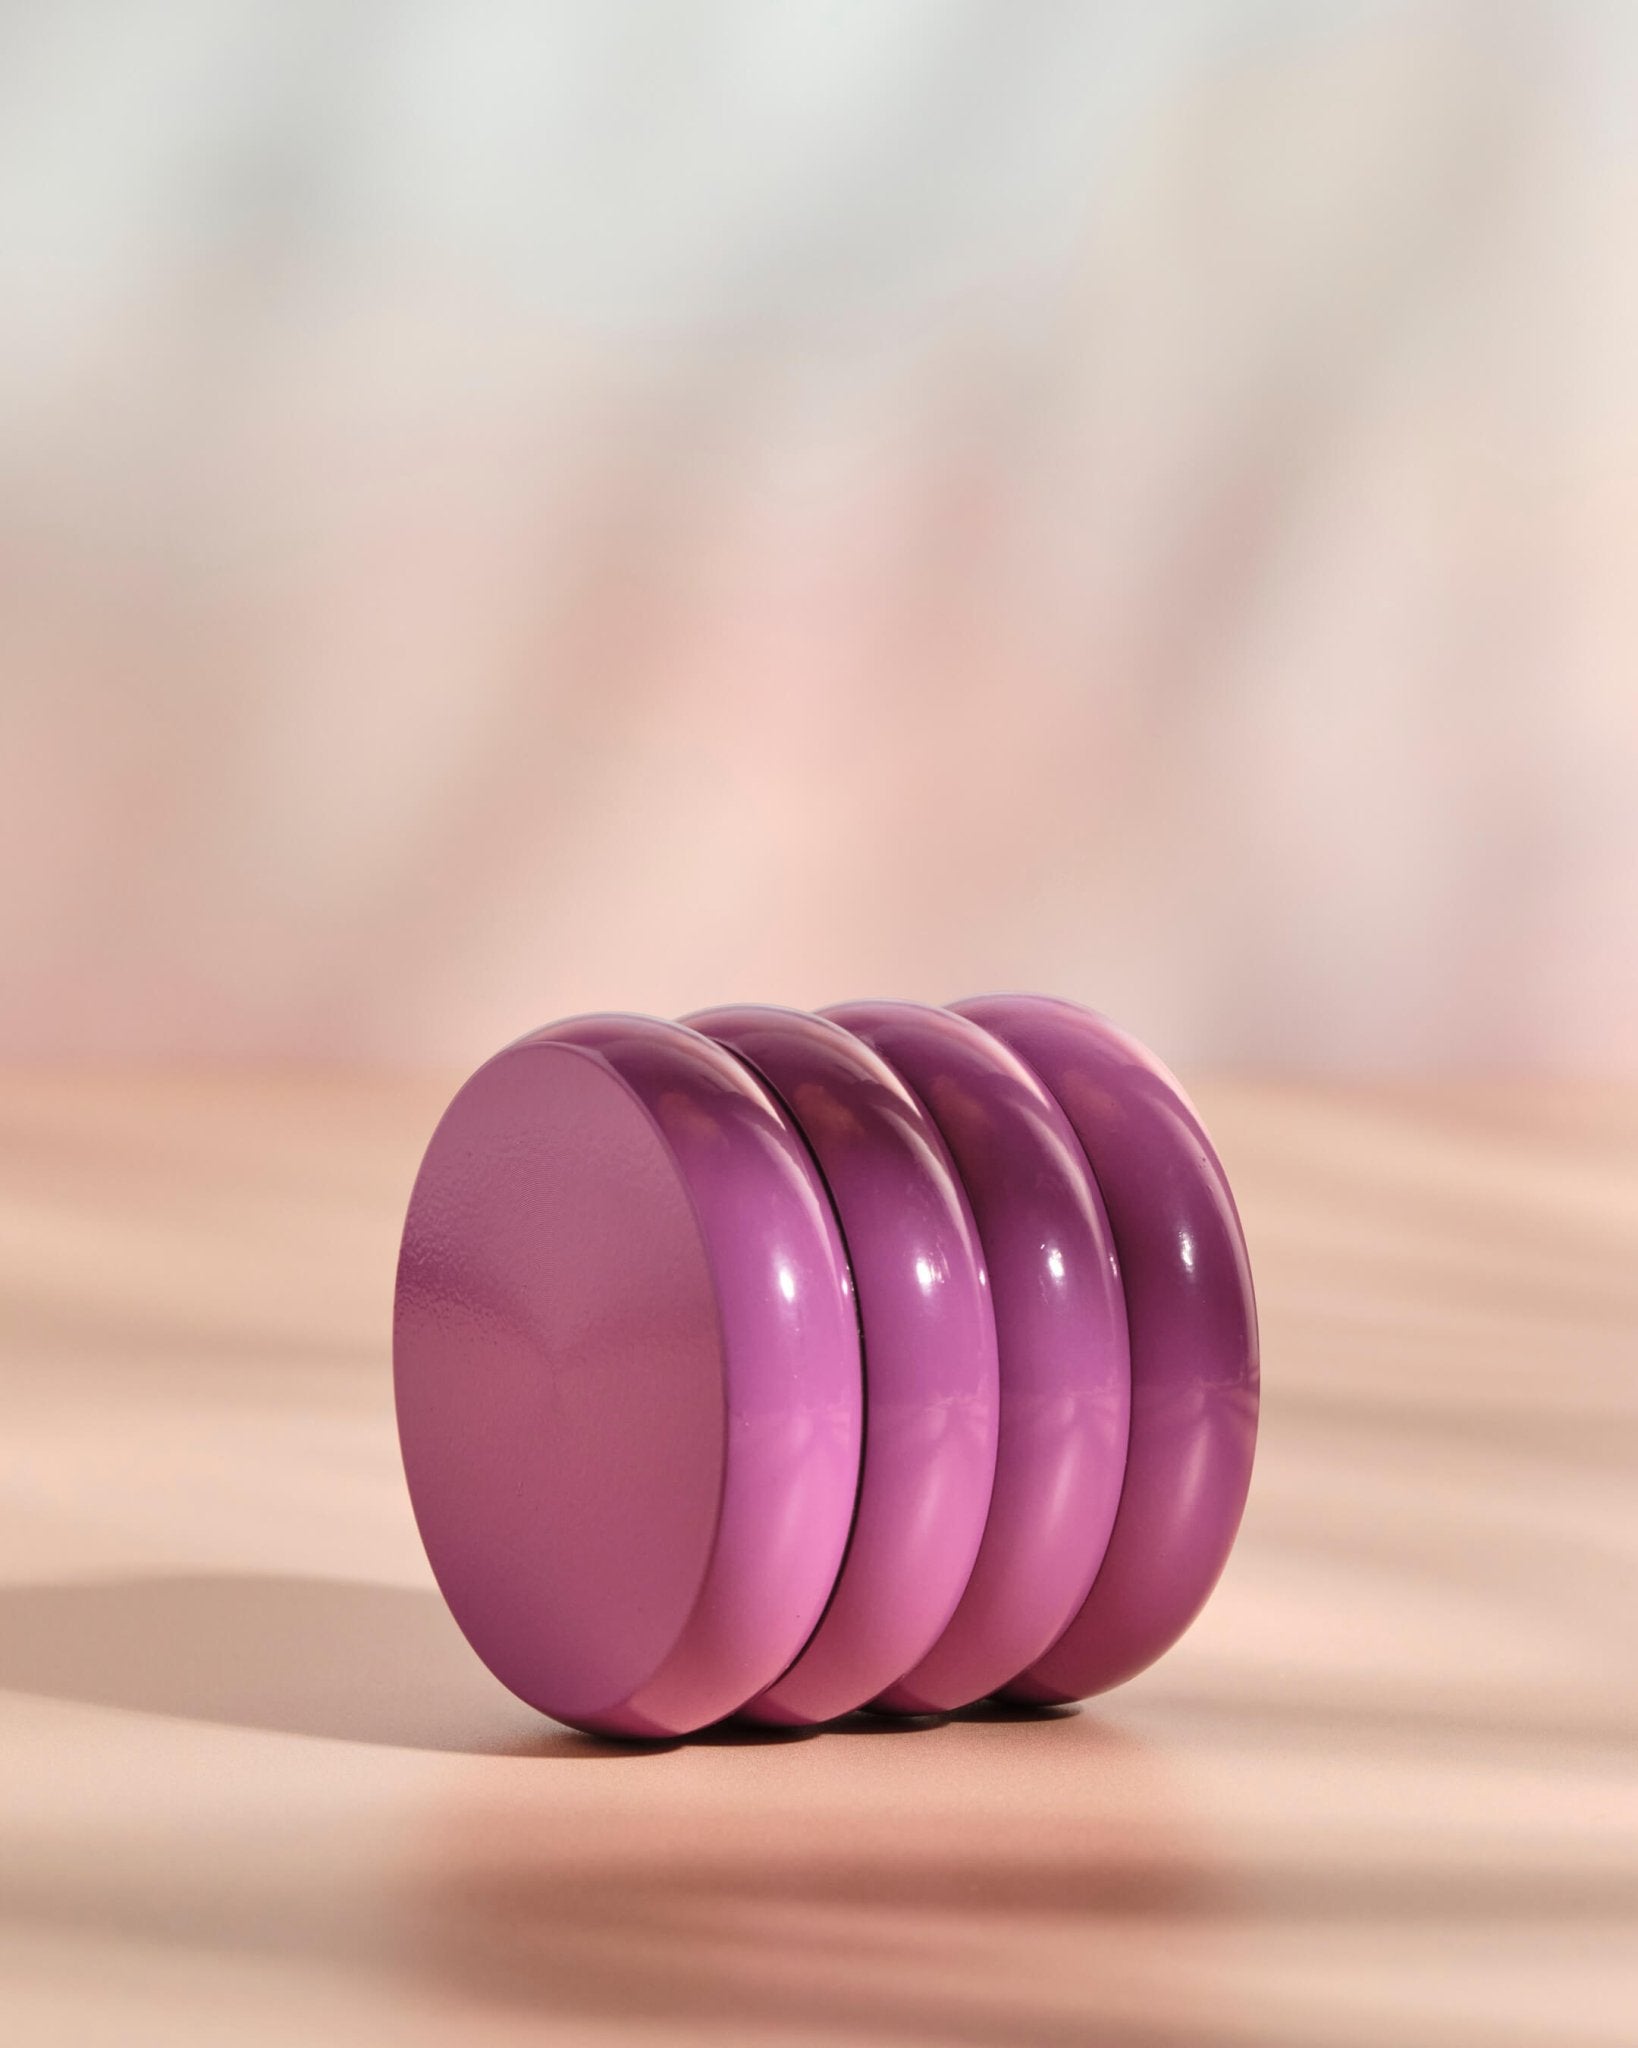 GLOSSY PURPLE WAVY GRINDER - Summer Sunset - ceramic grinder - smooth grinding experience